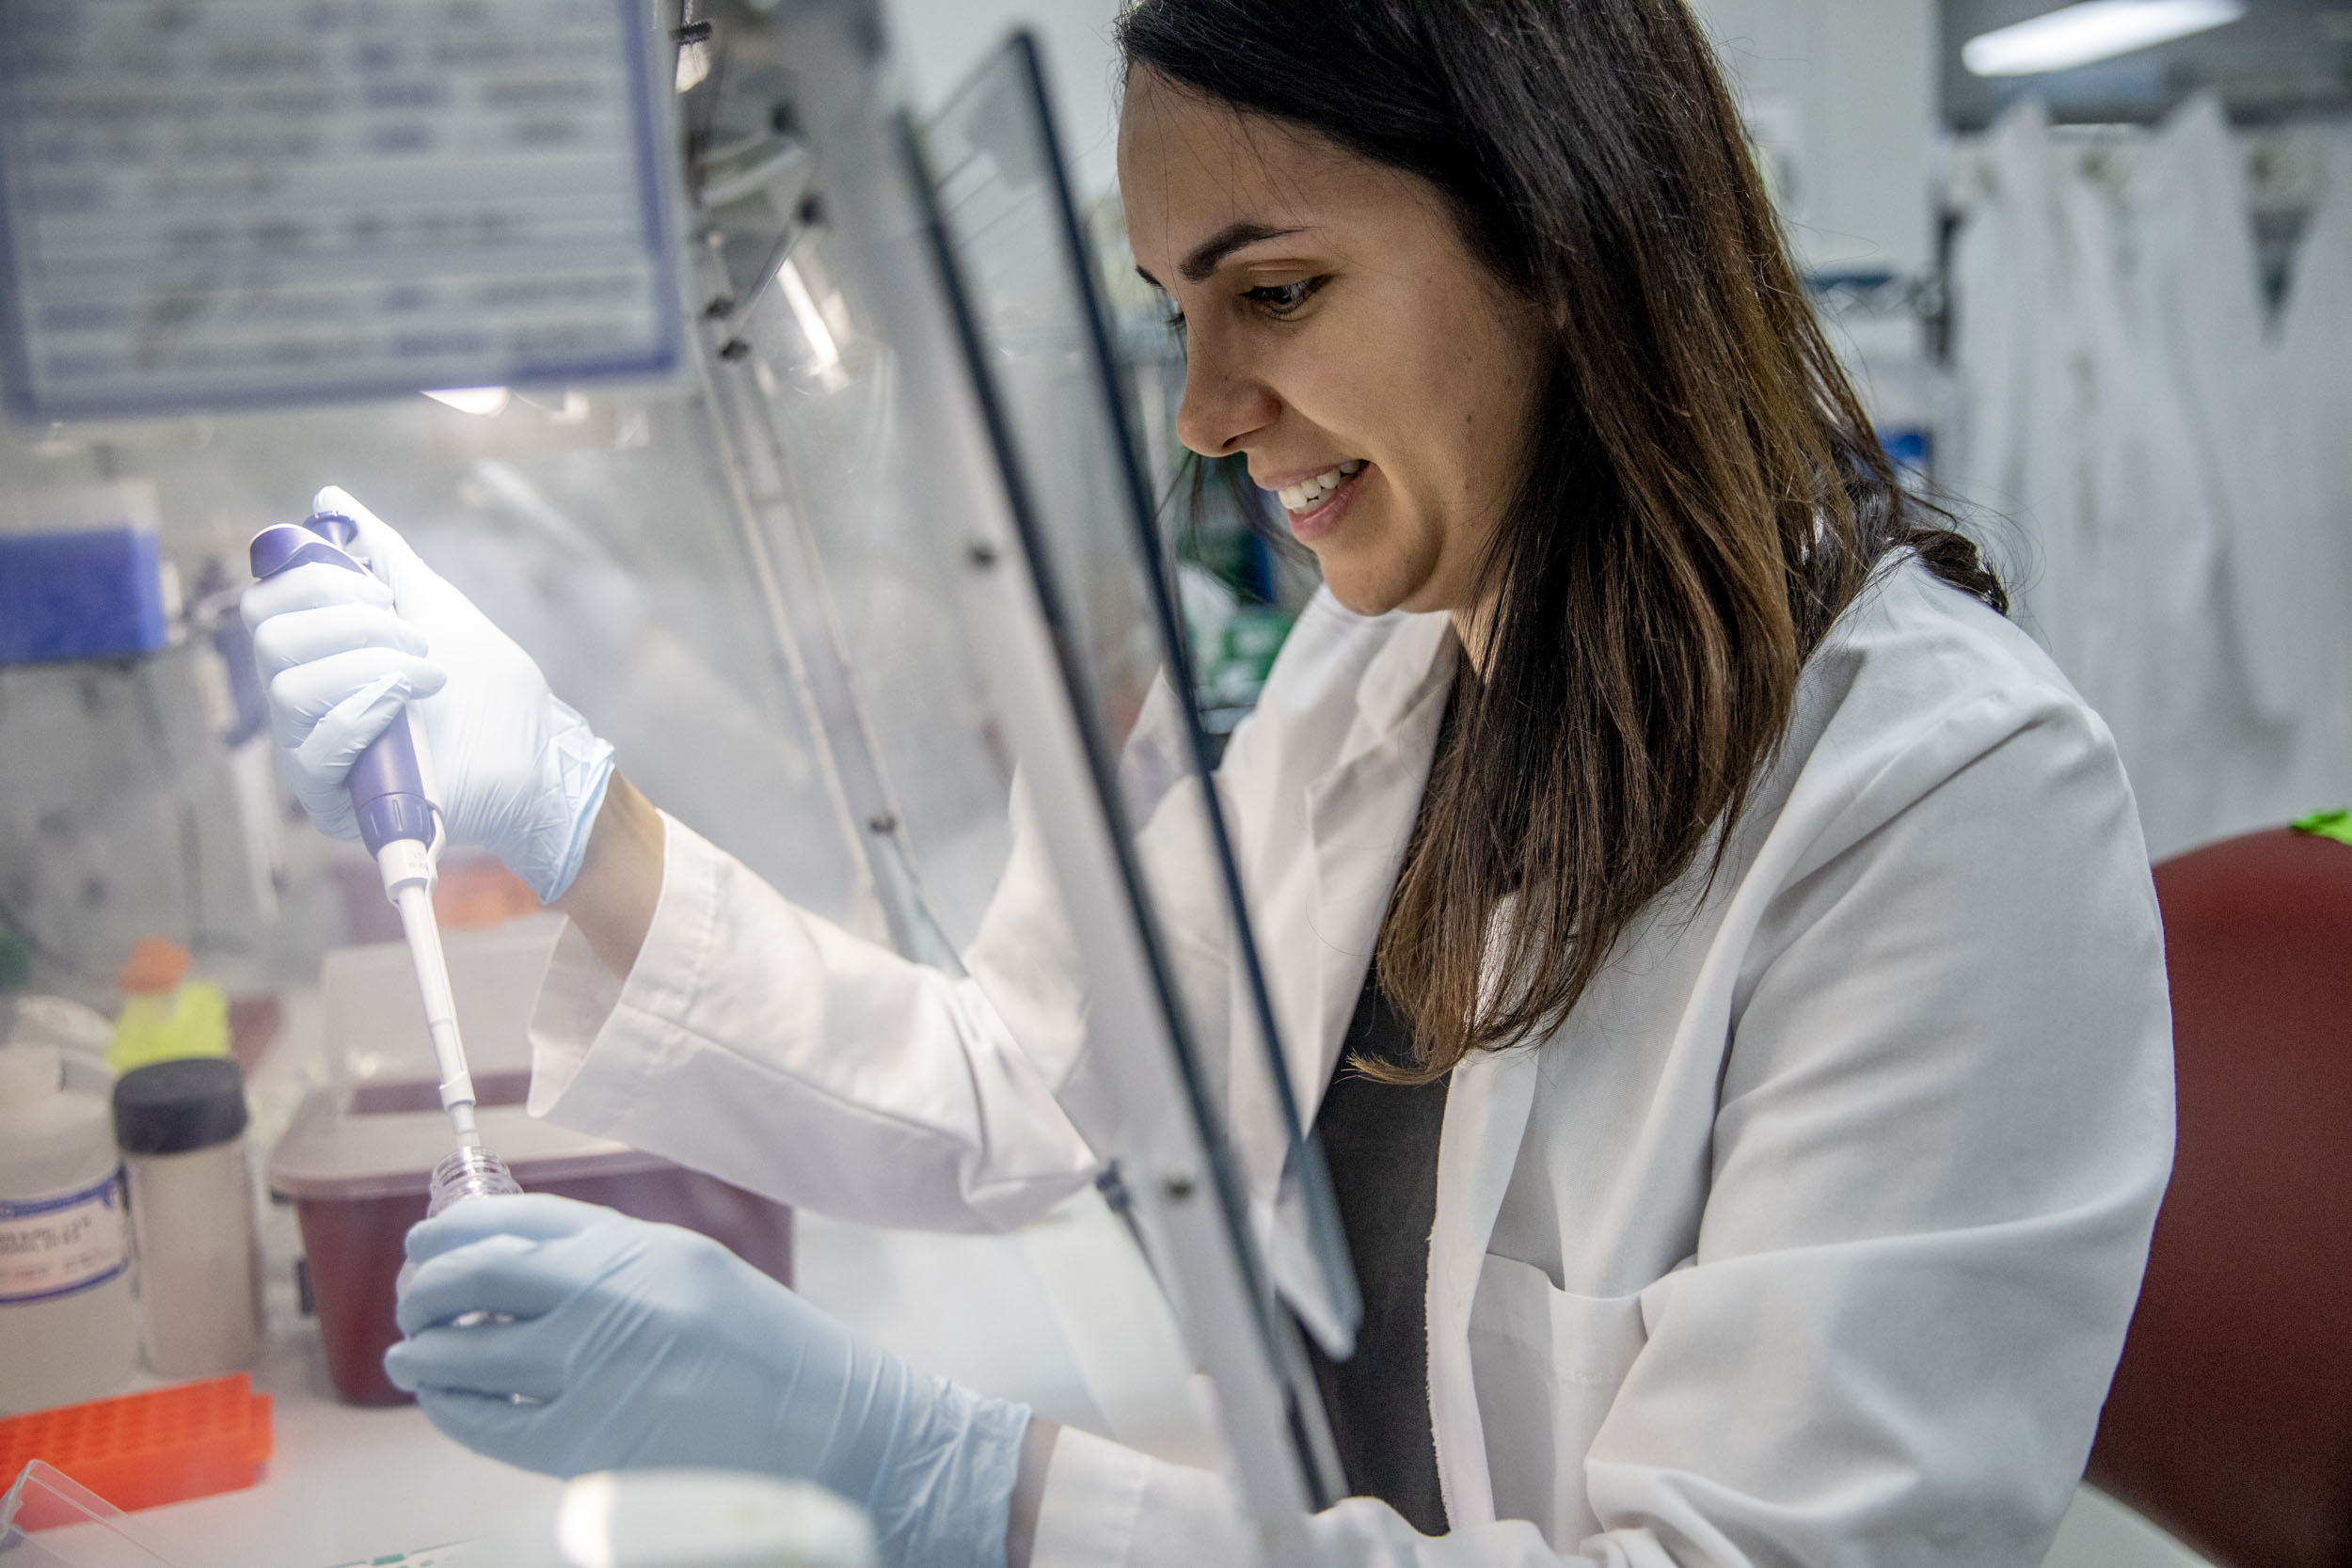 Intellectual Ventures researcher Corrie Ortega works on control sampling as a part of her cervical cancer research on June 17, 2019. (Photo by Dorothy Edwards/Crosscut)